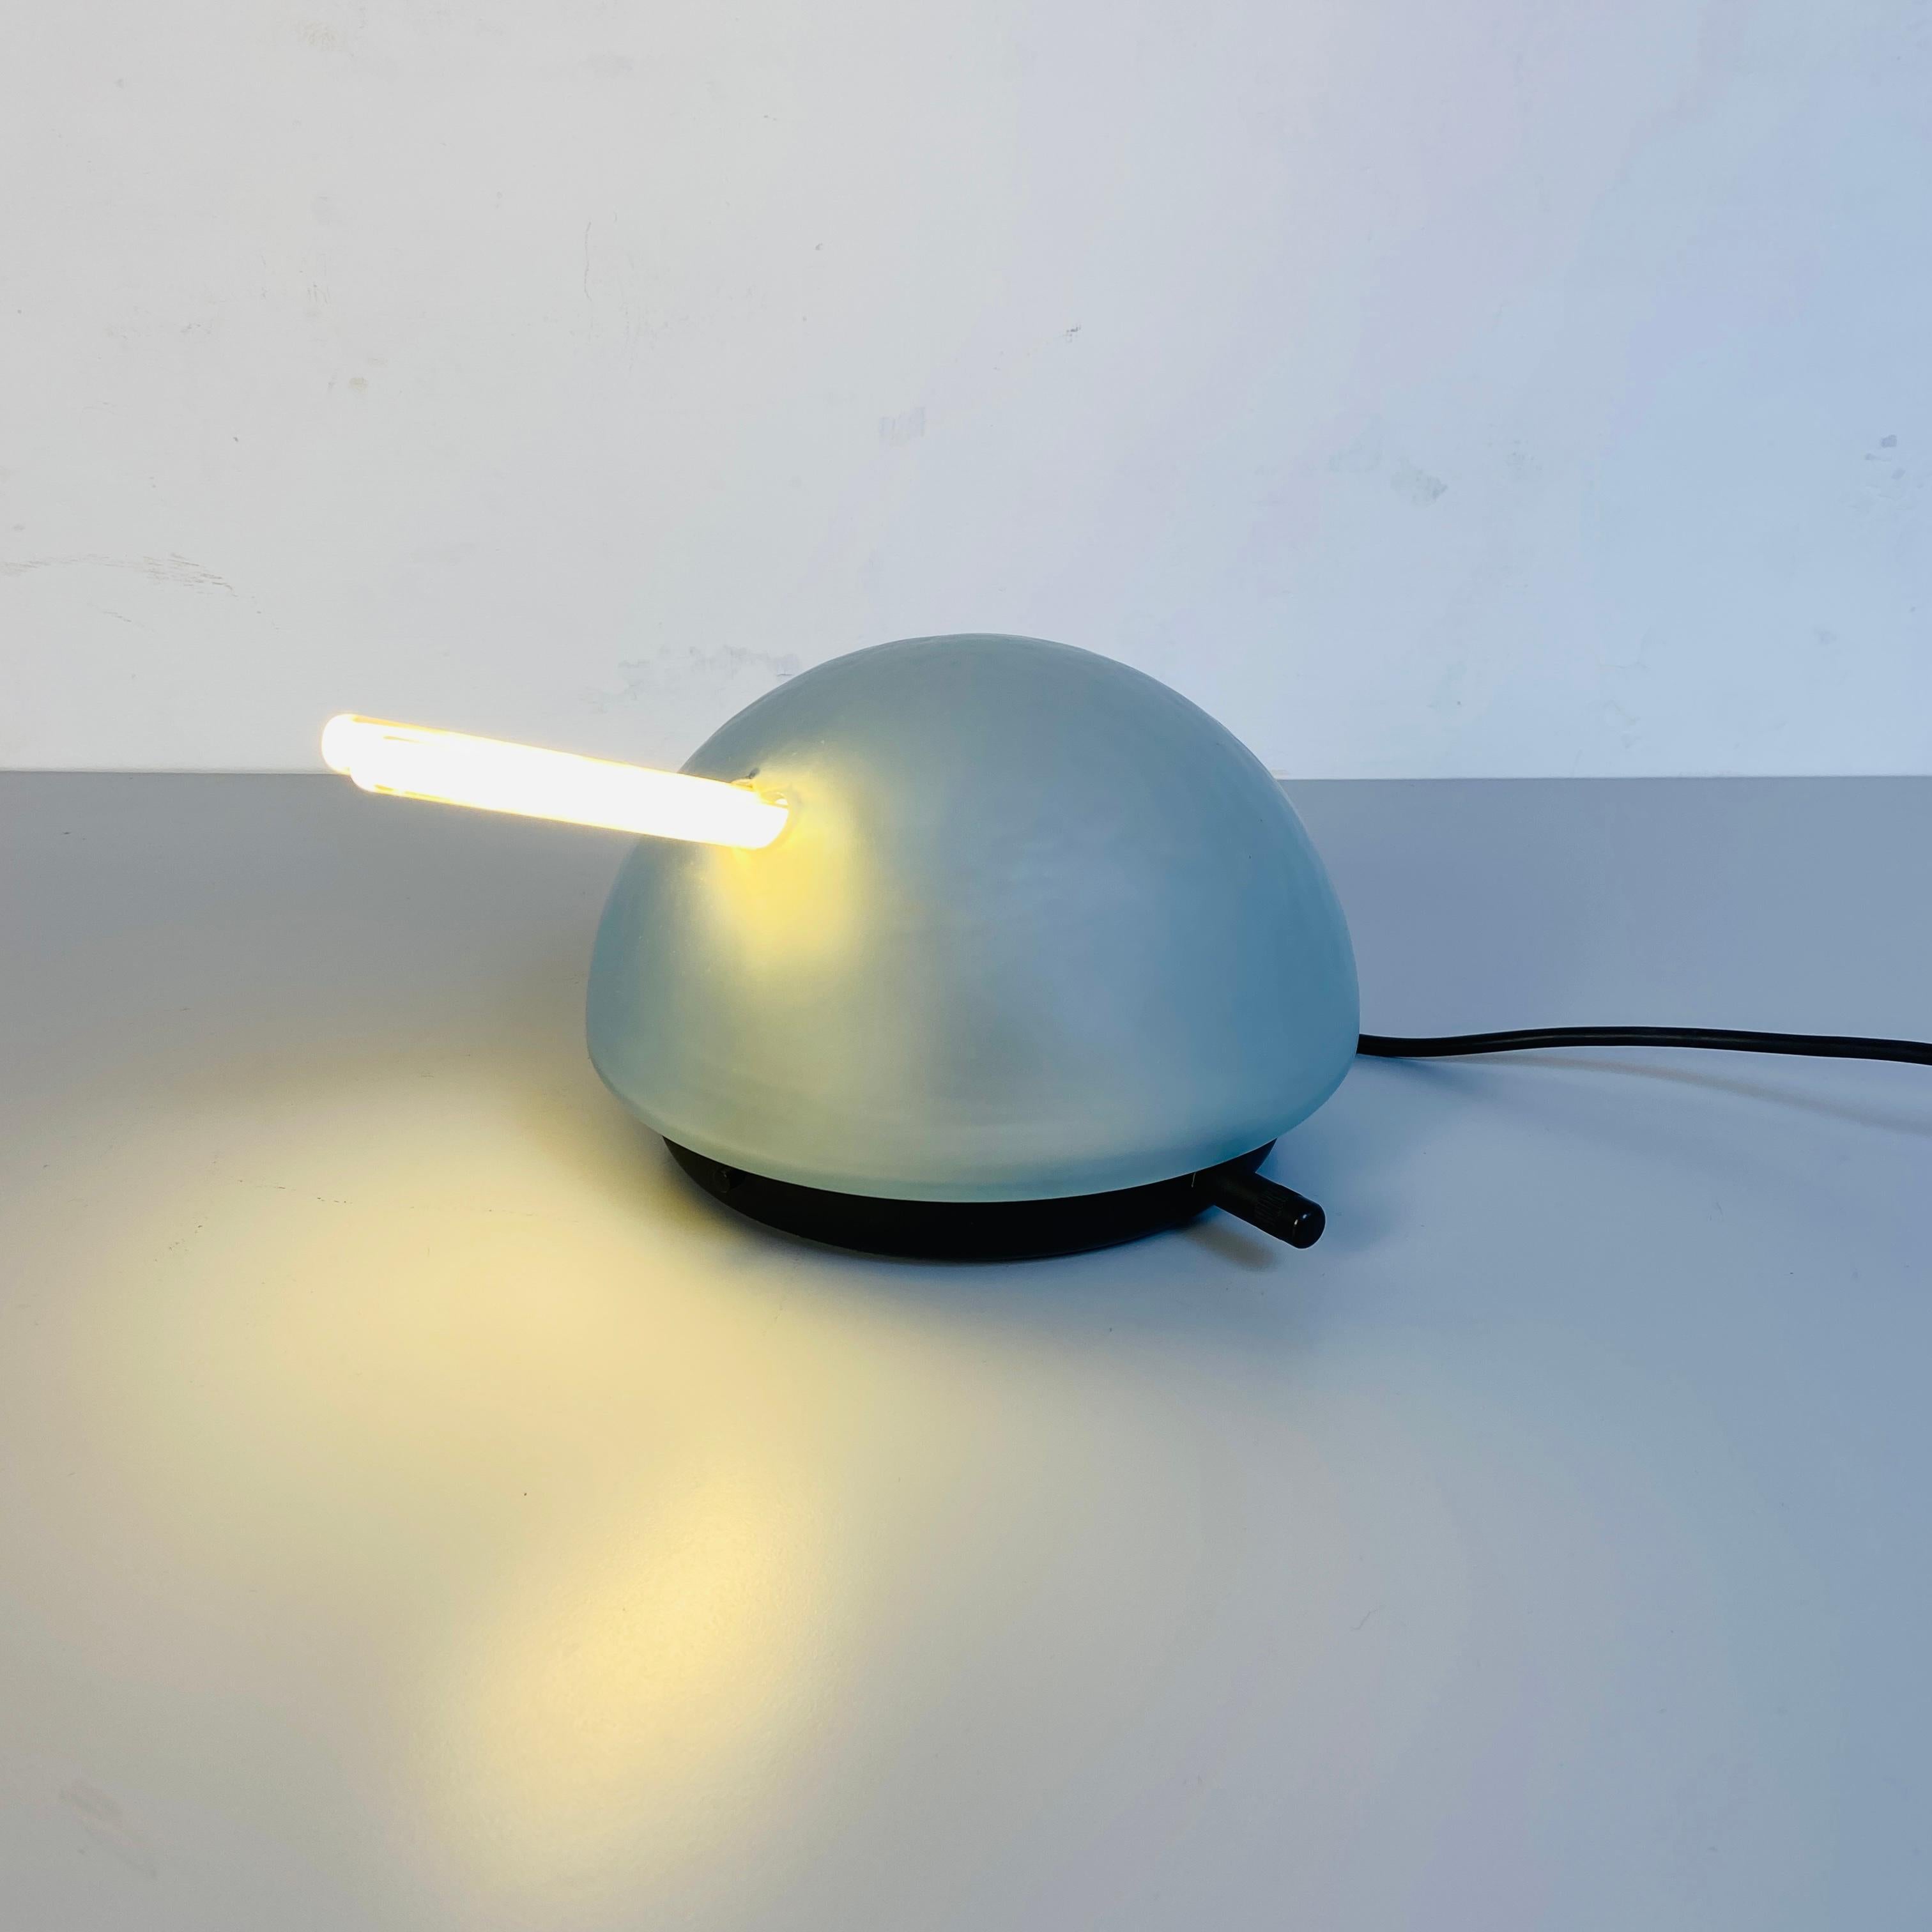 Italian Mid-Century Modern satin glass table lamp mod. Tank by VeArt, 1980s
Extreme rare and fun table lamp mod. Tank, made up of a light blue round satin glass and black metal base. The lamp holder is internal, through a wheel it is possible to